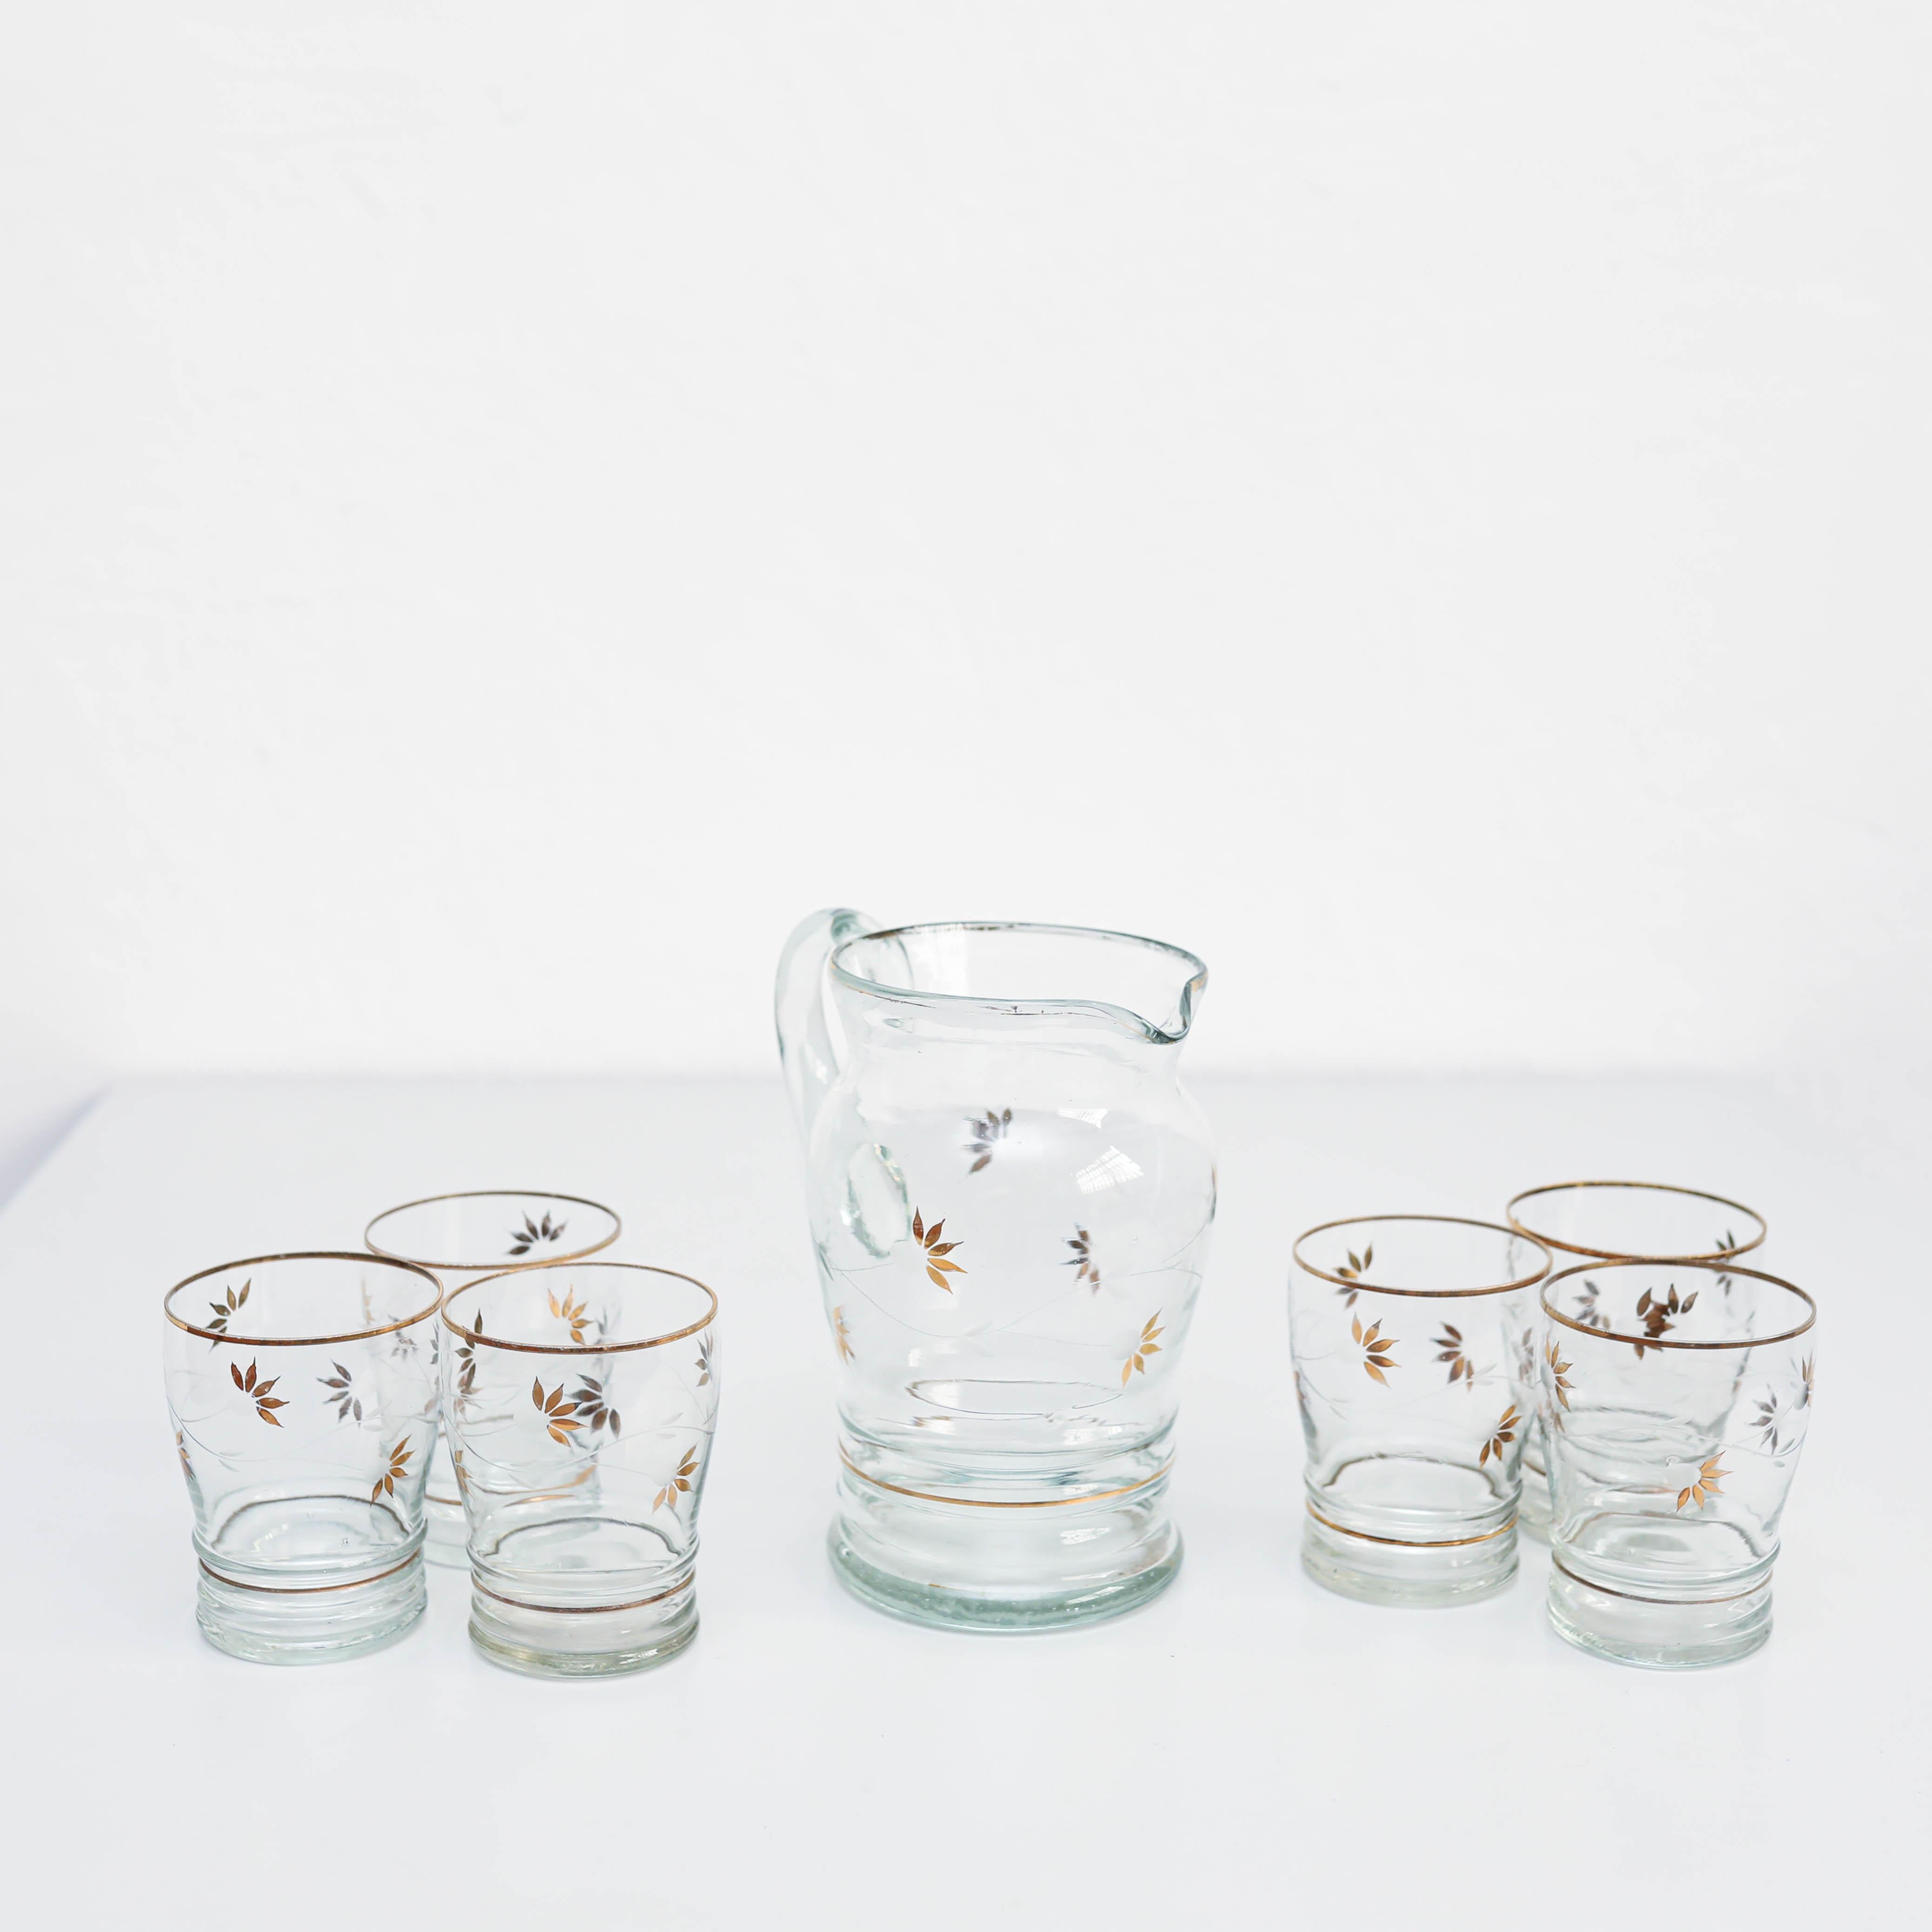  Set of seven Vintage Glass Vase and glasses.

Made by unknown manufacturer in Spain, circa 1980.

In original condition, with minor wear consistent with age and use, preserving a beautiful patina.

Materials:
Glass

Dimensions:
Vase: H 19 cm x W